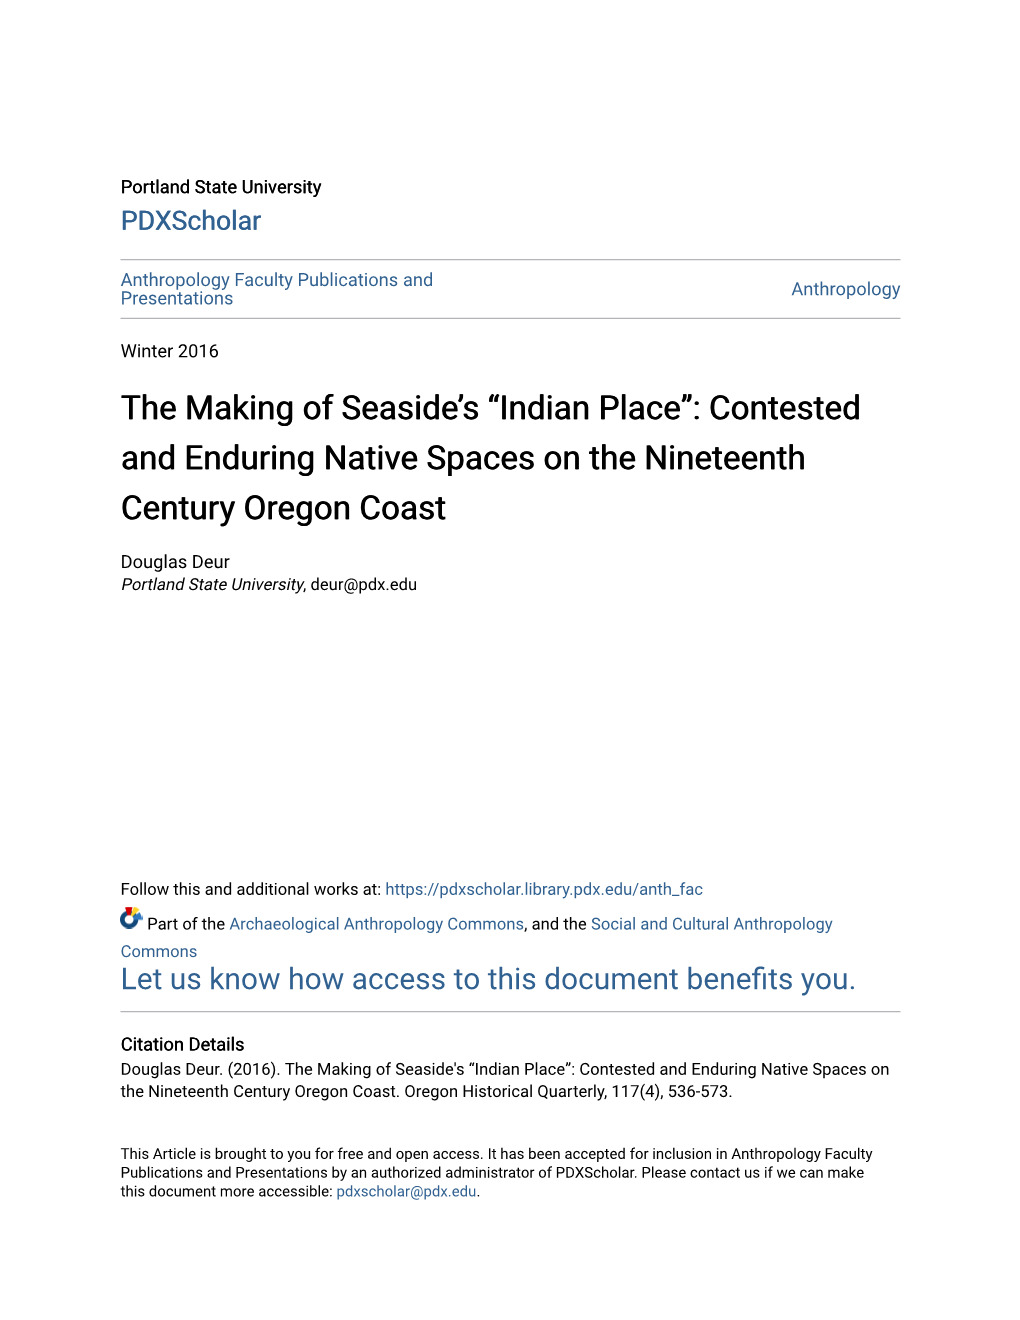 “Indian Place”: Contested and Enduring Native Spaces on the Nineteenth Century Oregon Coast